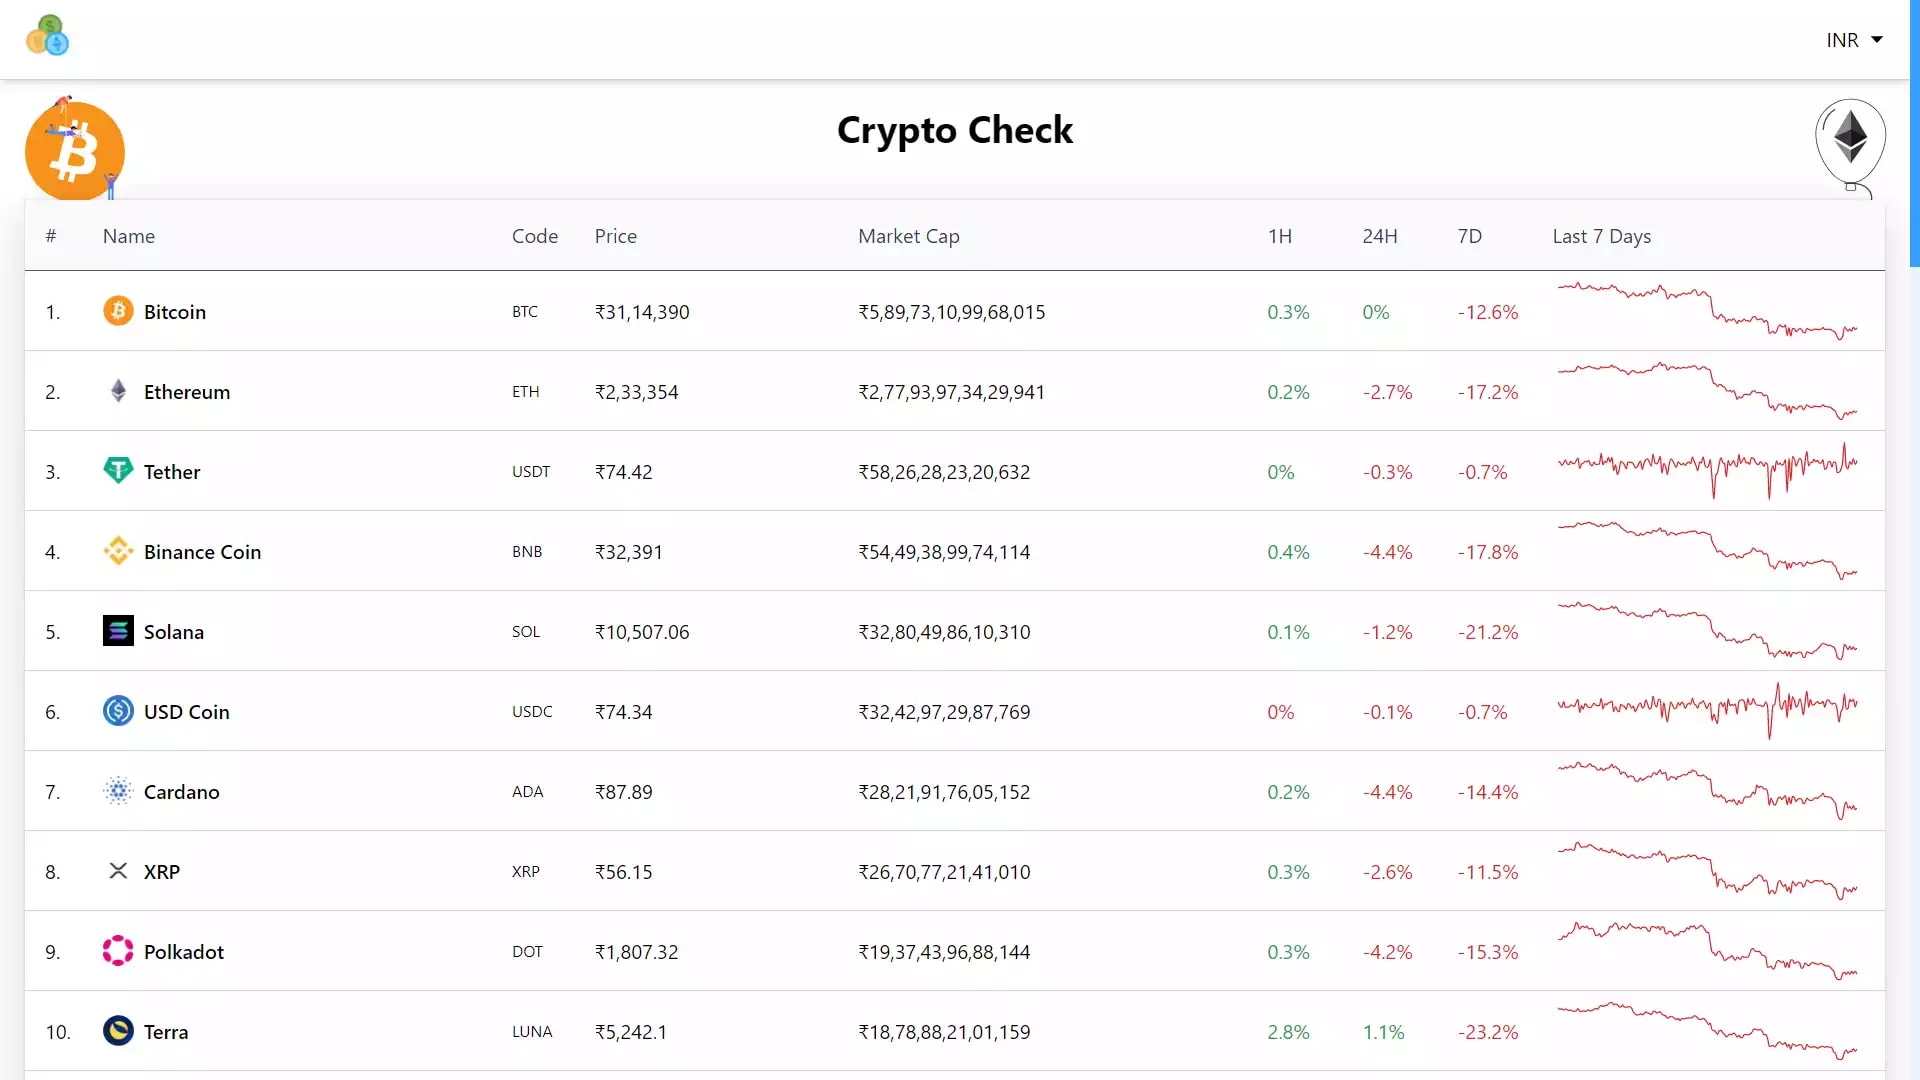 check crypto prices on bloomberg